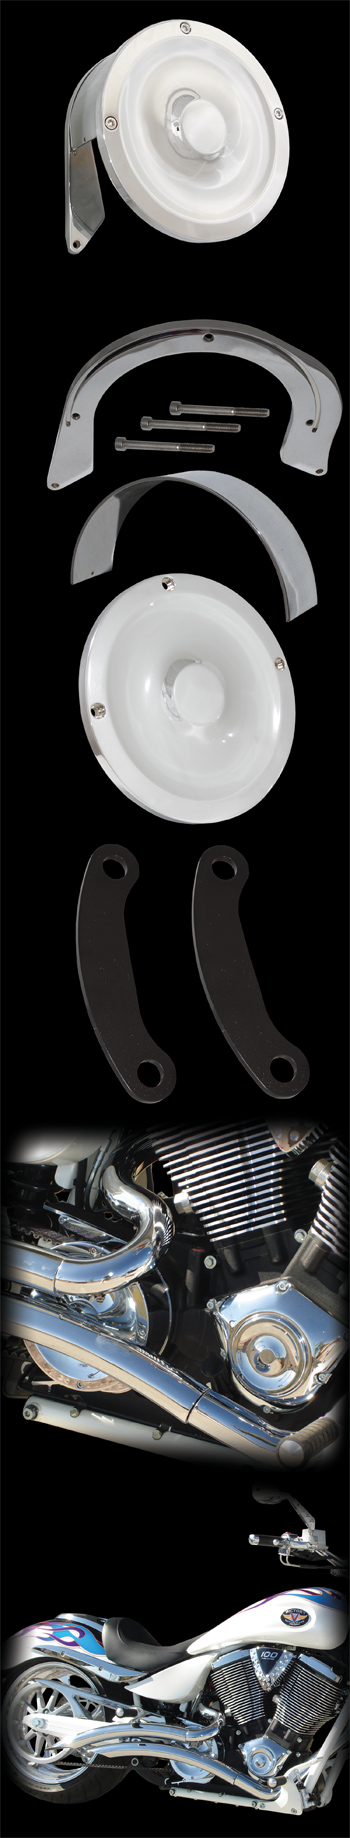 Victory Motorcycle belt cover and lowering kit